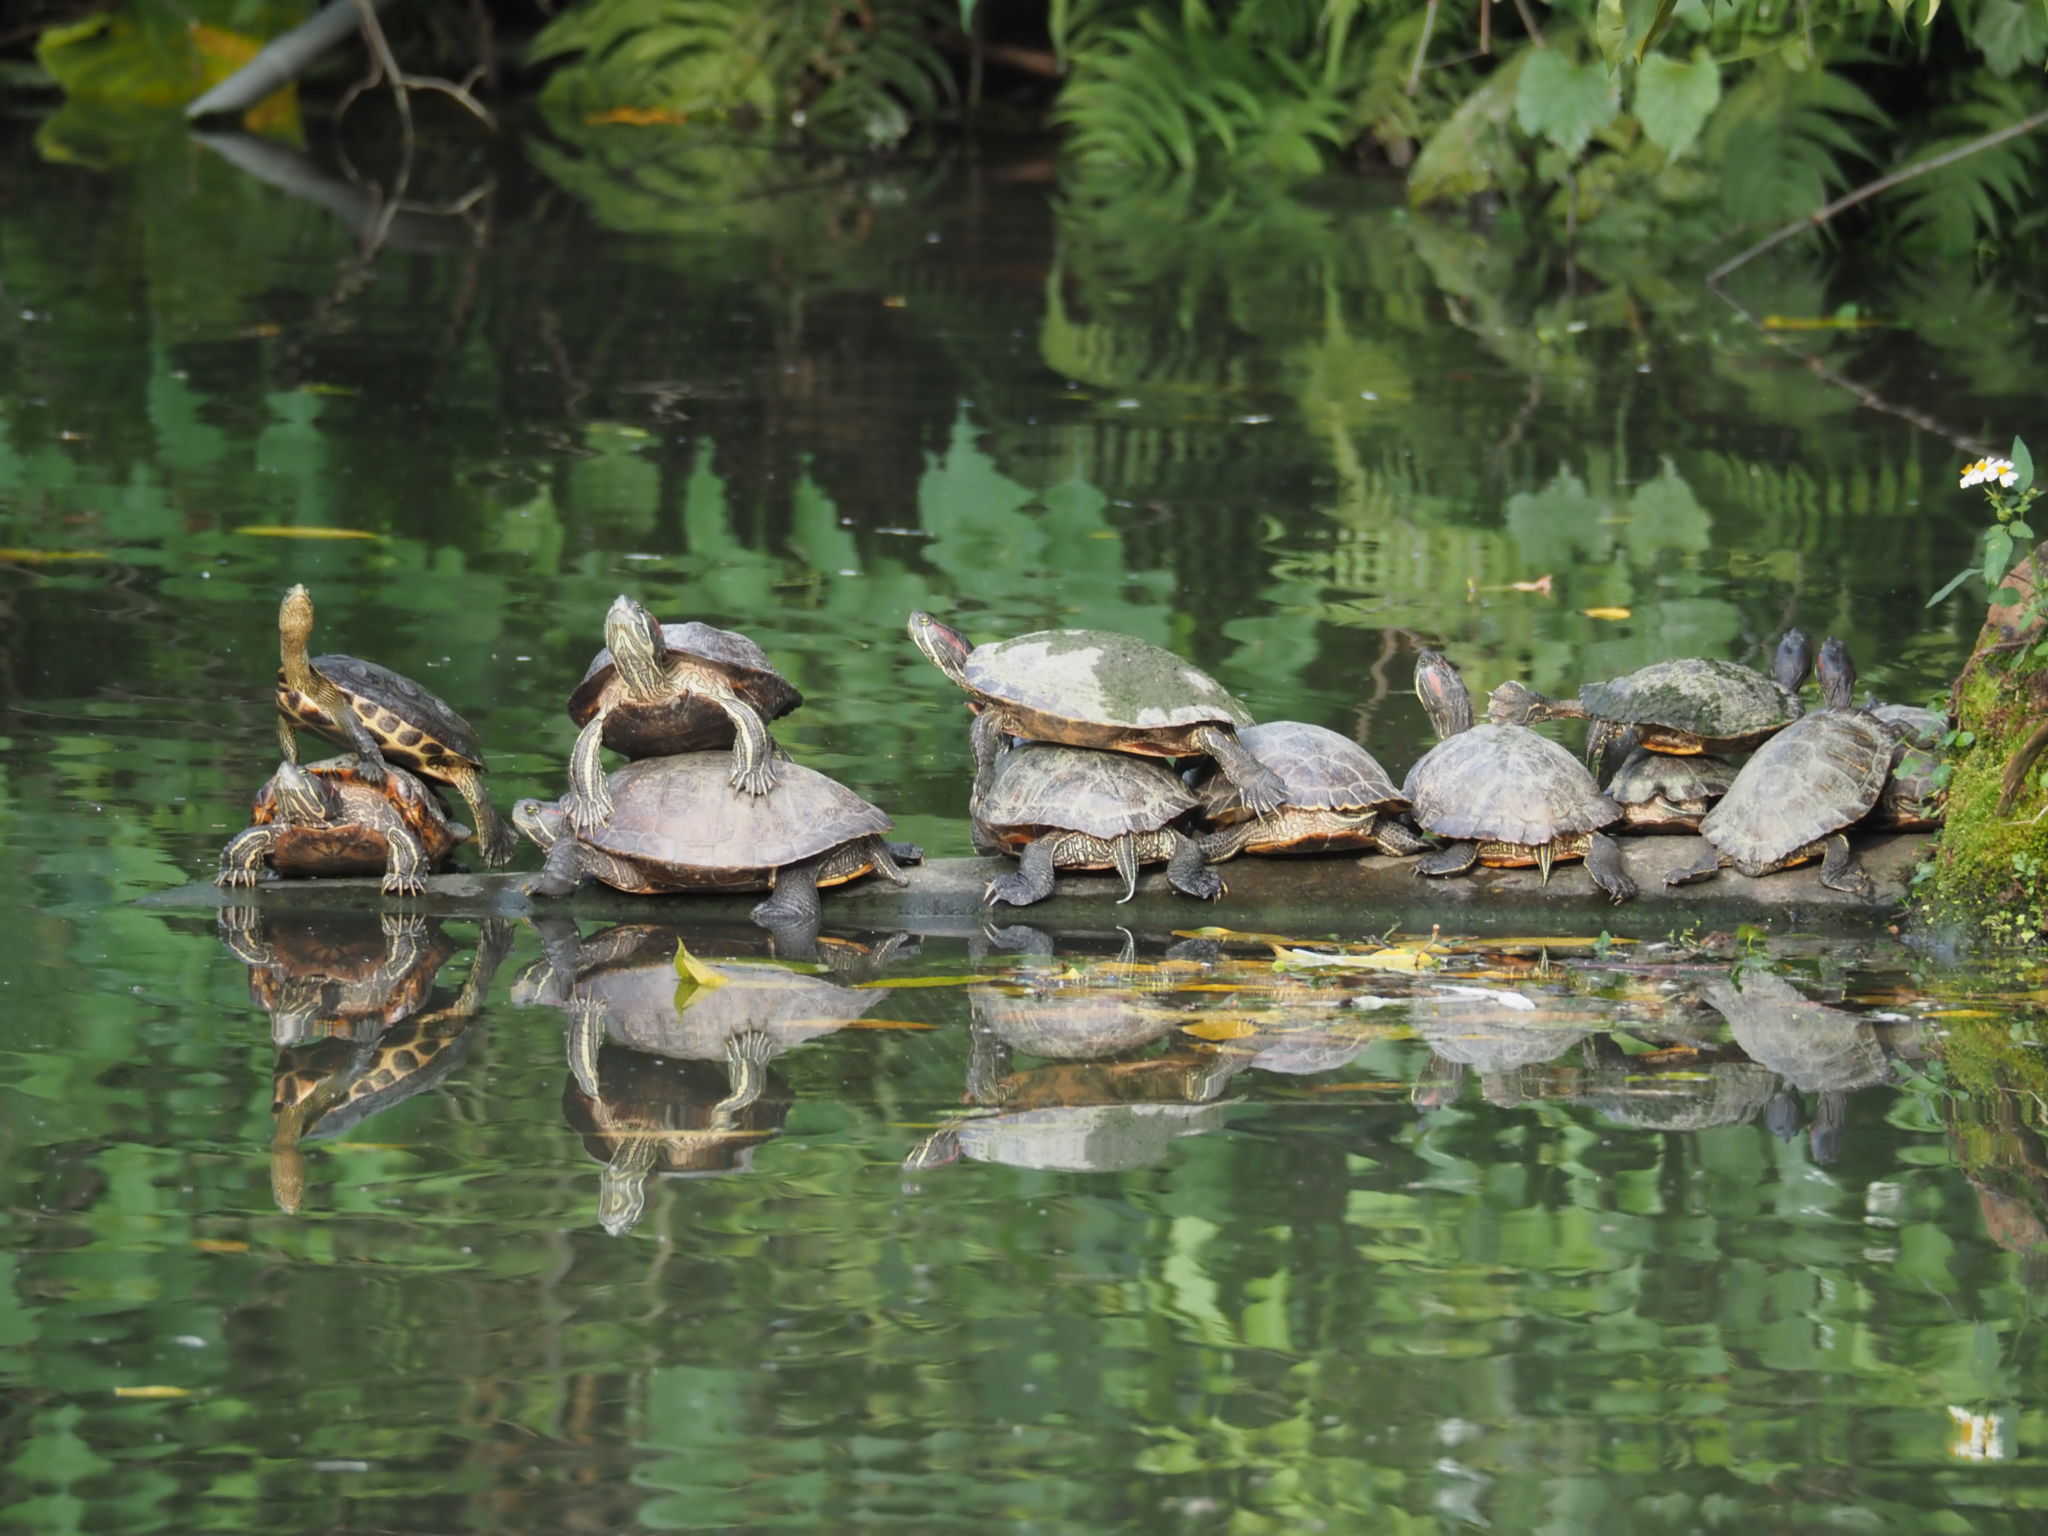  Taiwan, 28 Mar 2024  Red eared slider turtles basking in the big pond in Daan Forest Park.